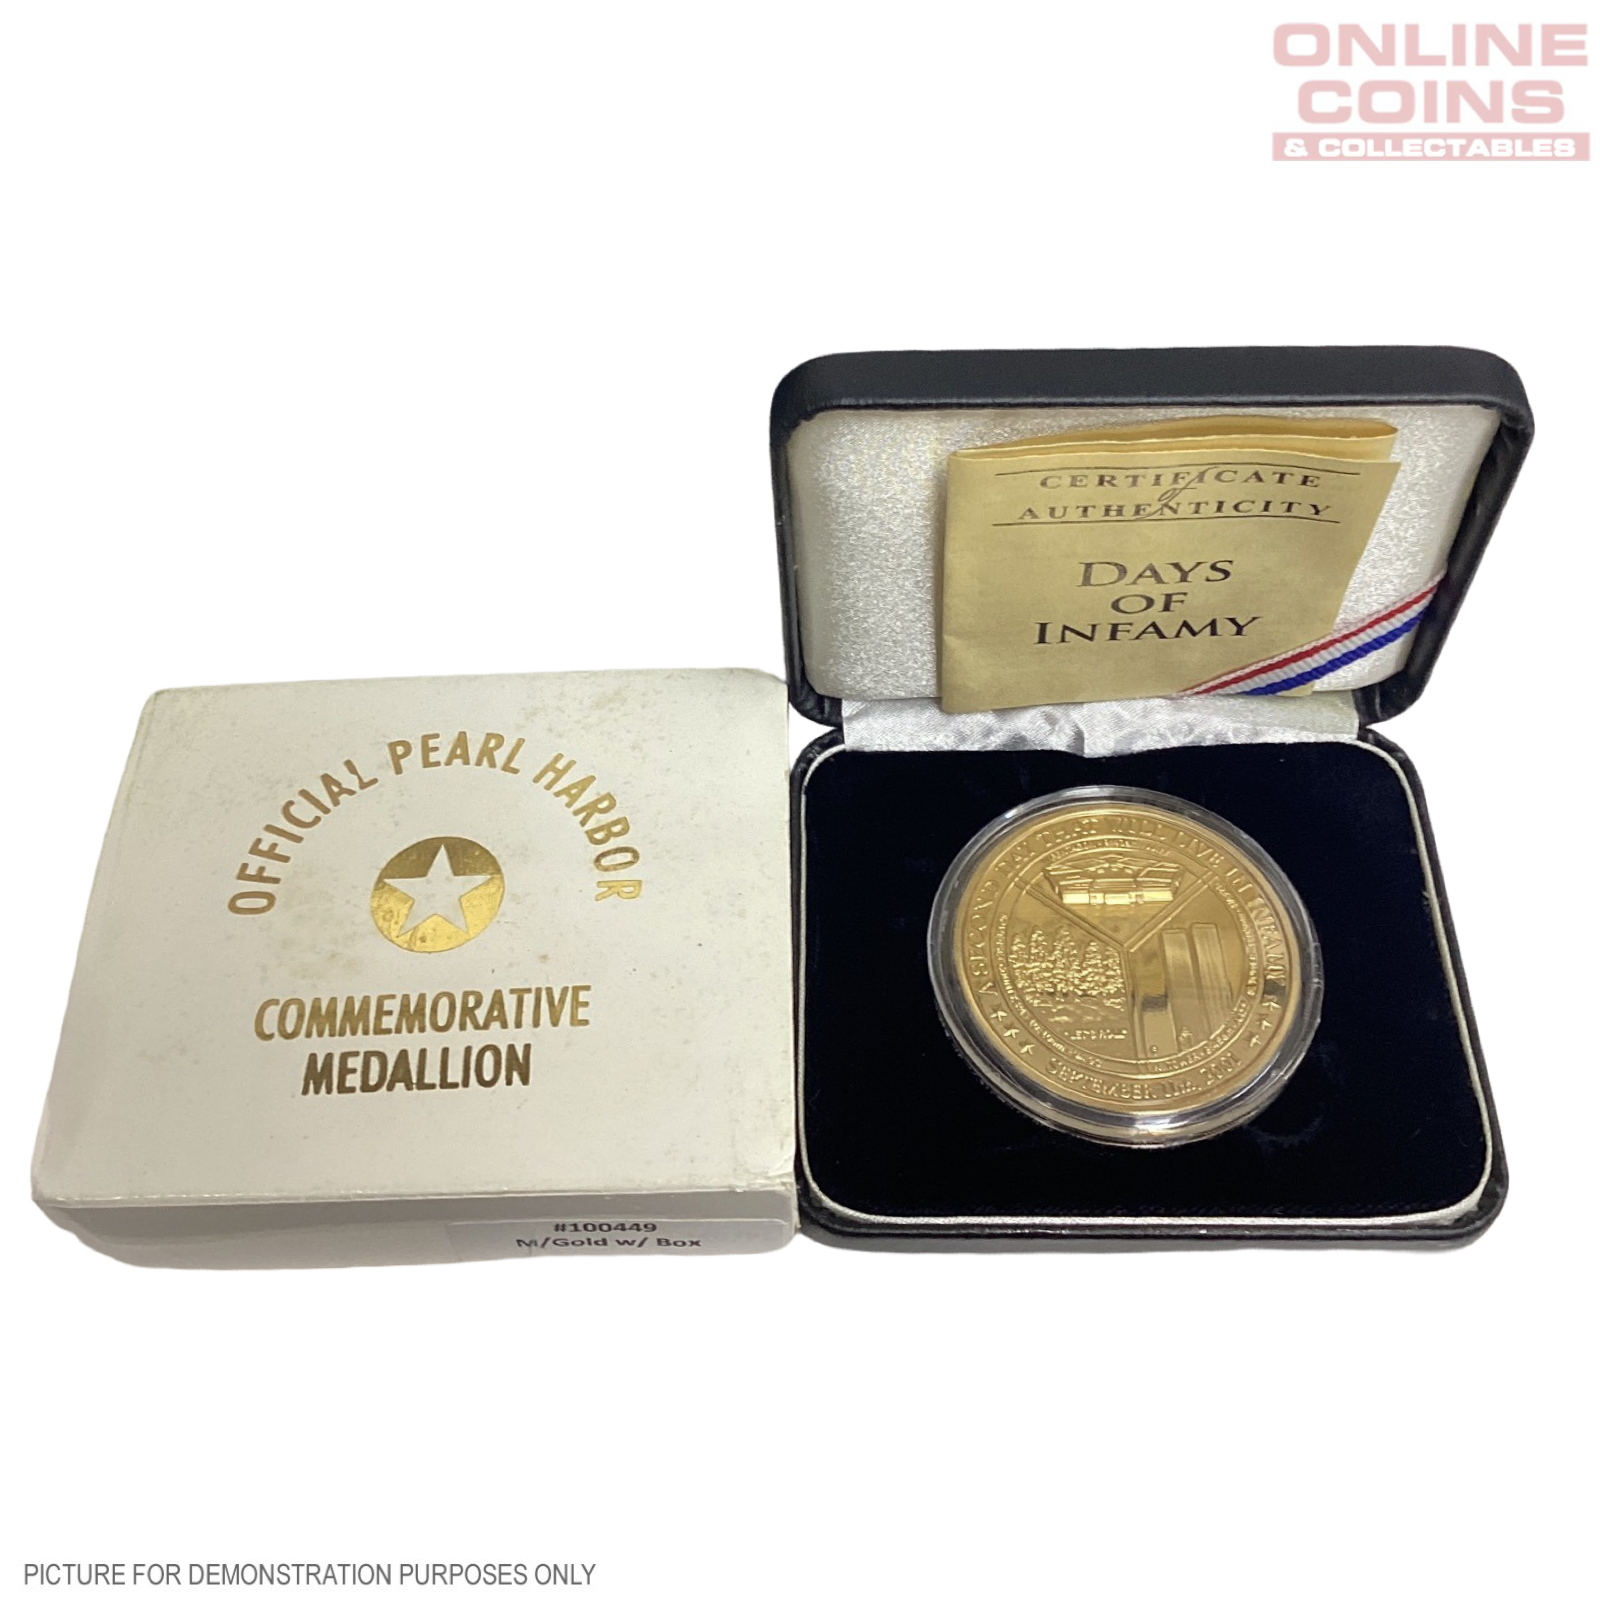 Days of Infamy: Pearl Harbour - 9/11 Commemorative Medallion